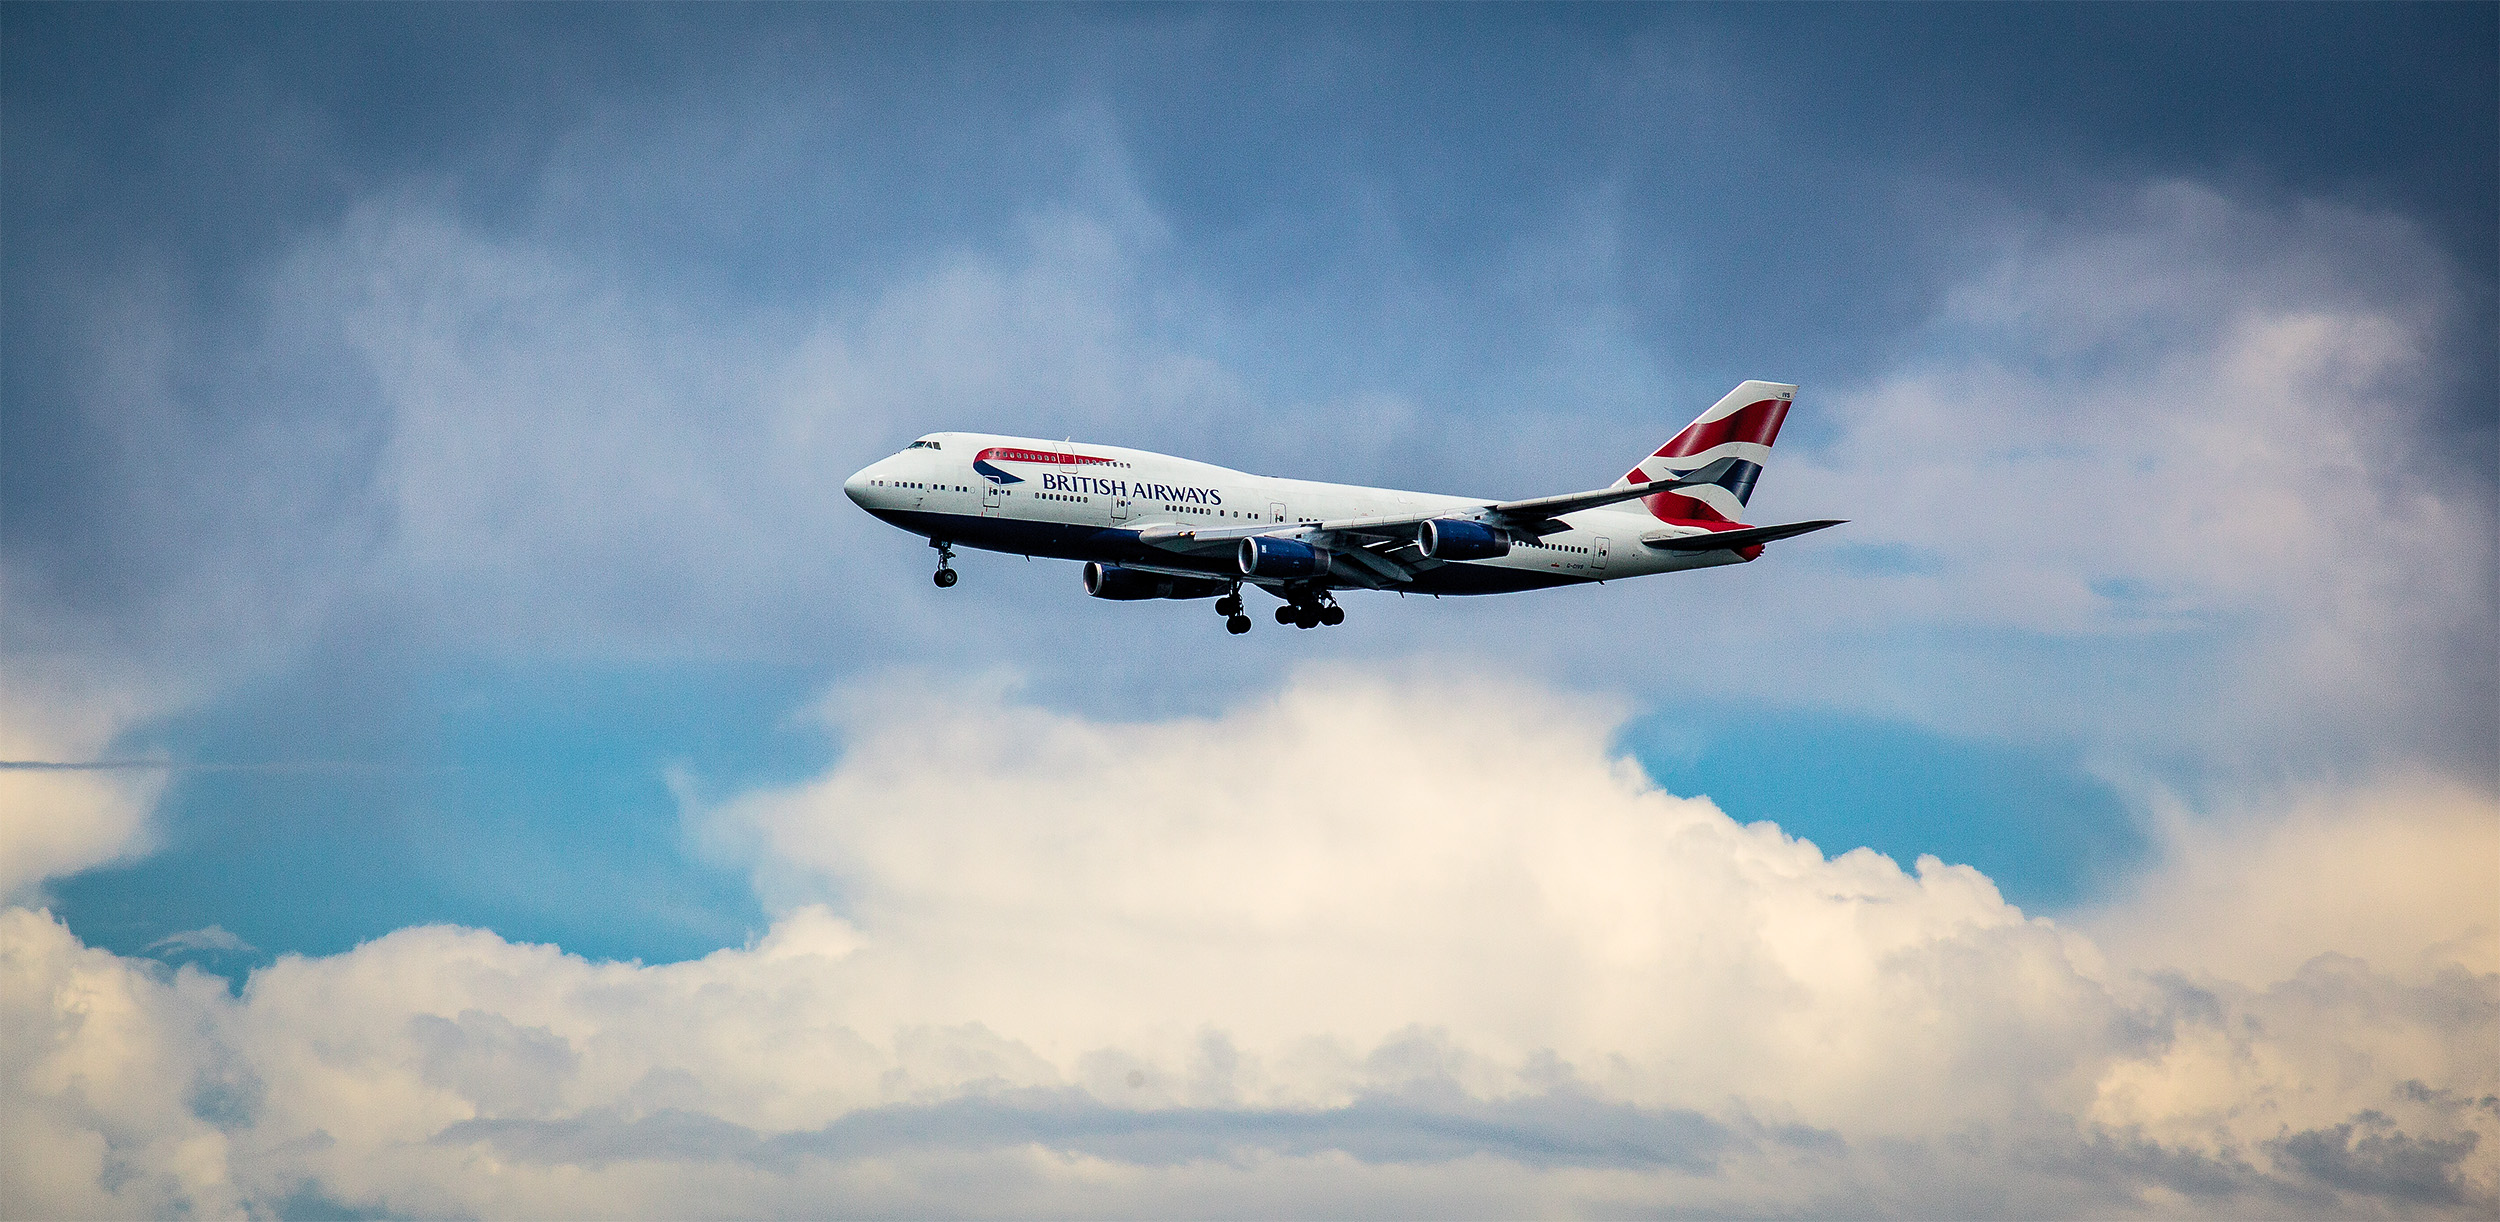 British Airways approaches SFO with a dramatic cloud backdrop (9661629348)